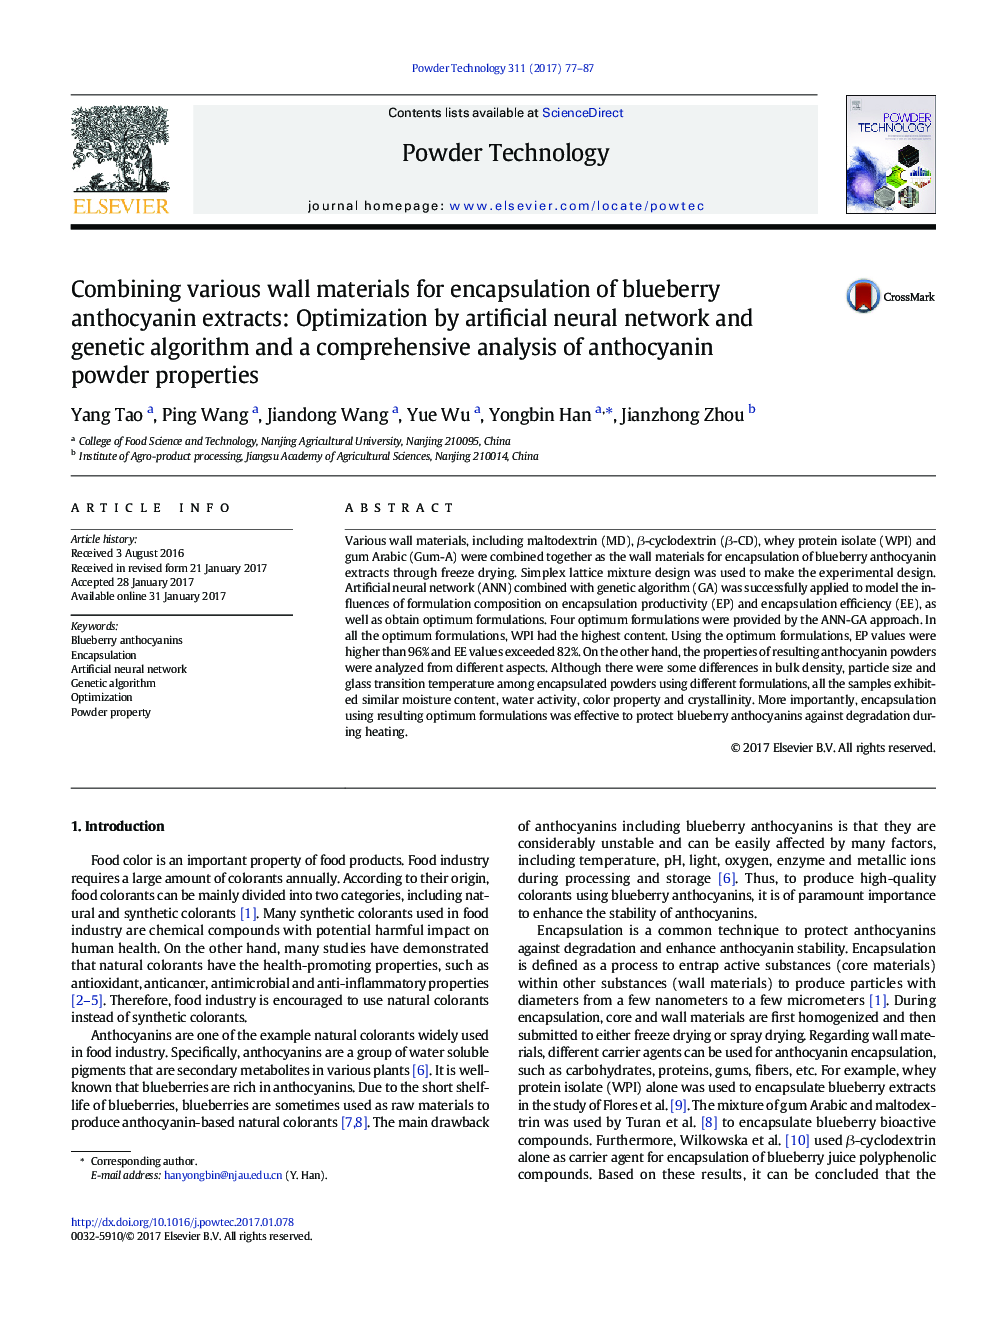 Combining various wall materials for encapsulation of blueberry anthocyanin extracts: Optimization by artificial neural network and genetic algorithm and a comprehensive analysis of anthocyanin powder properties